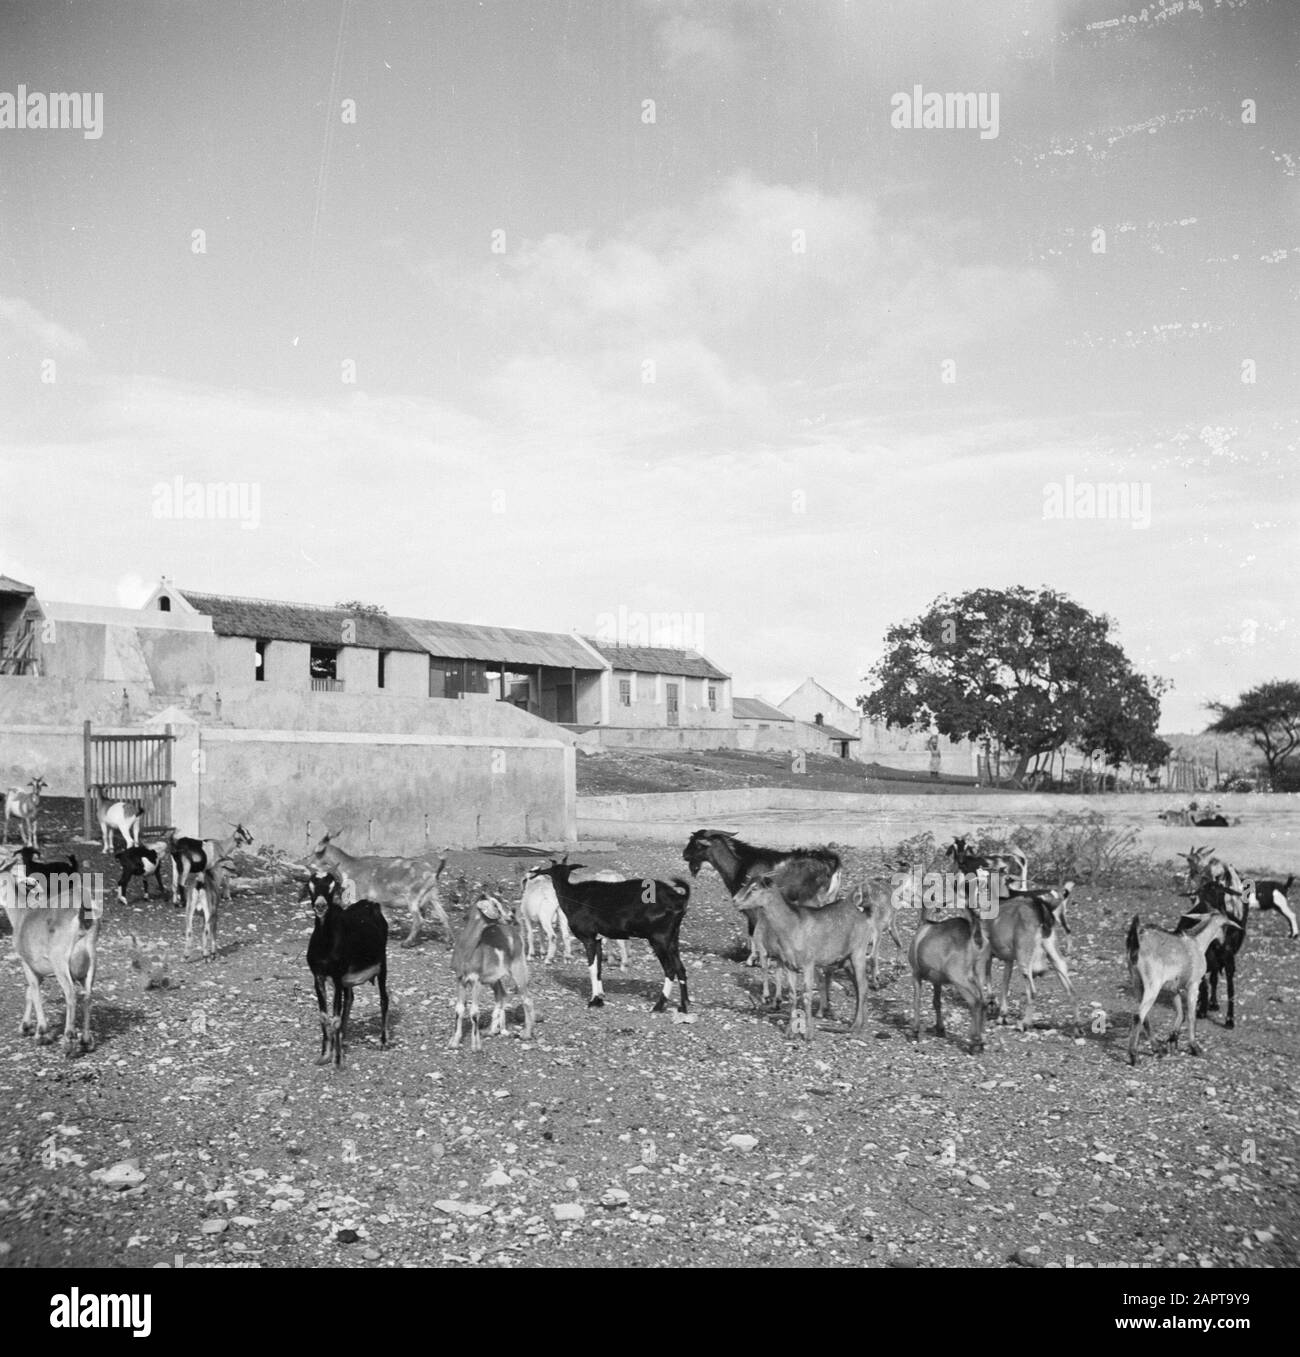 Journey to Suriname and the Netherlands Antilles  Goats at country house Savonet on Curaçao Date: 1947 Location: Curaçao Keywords: goats, country houses Stock Photo